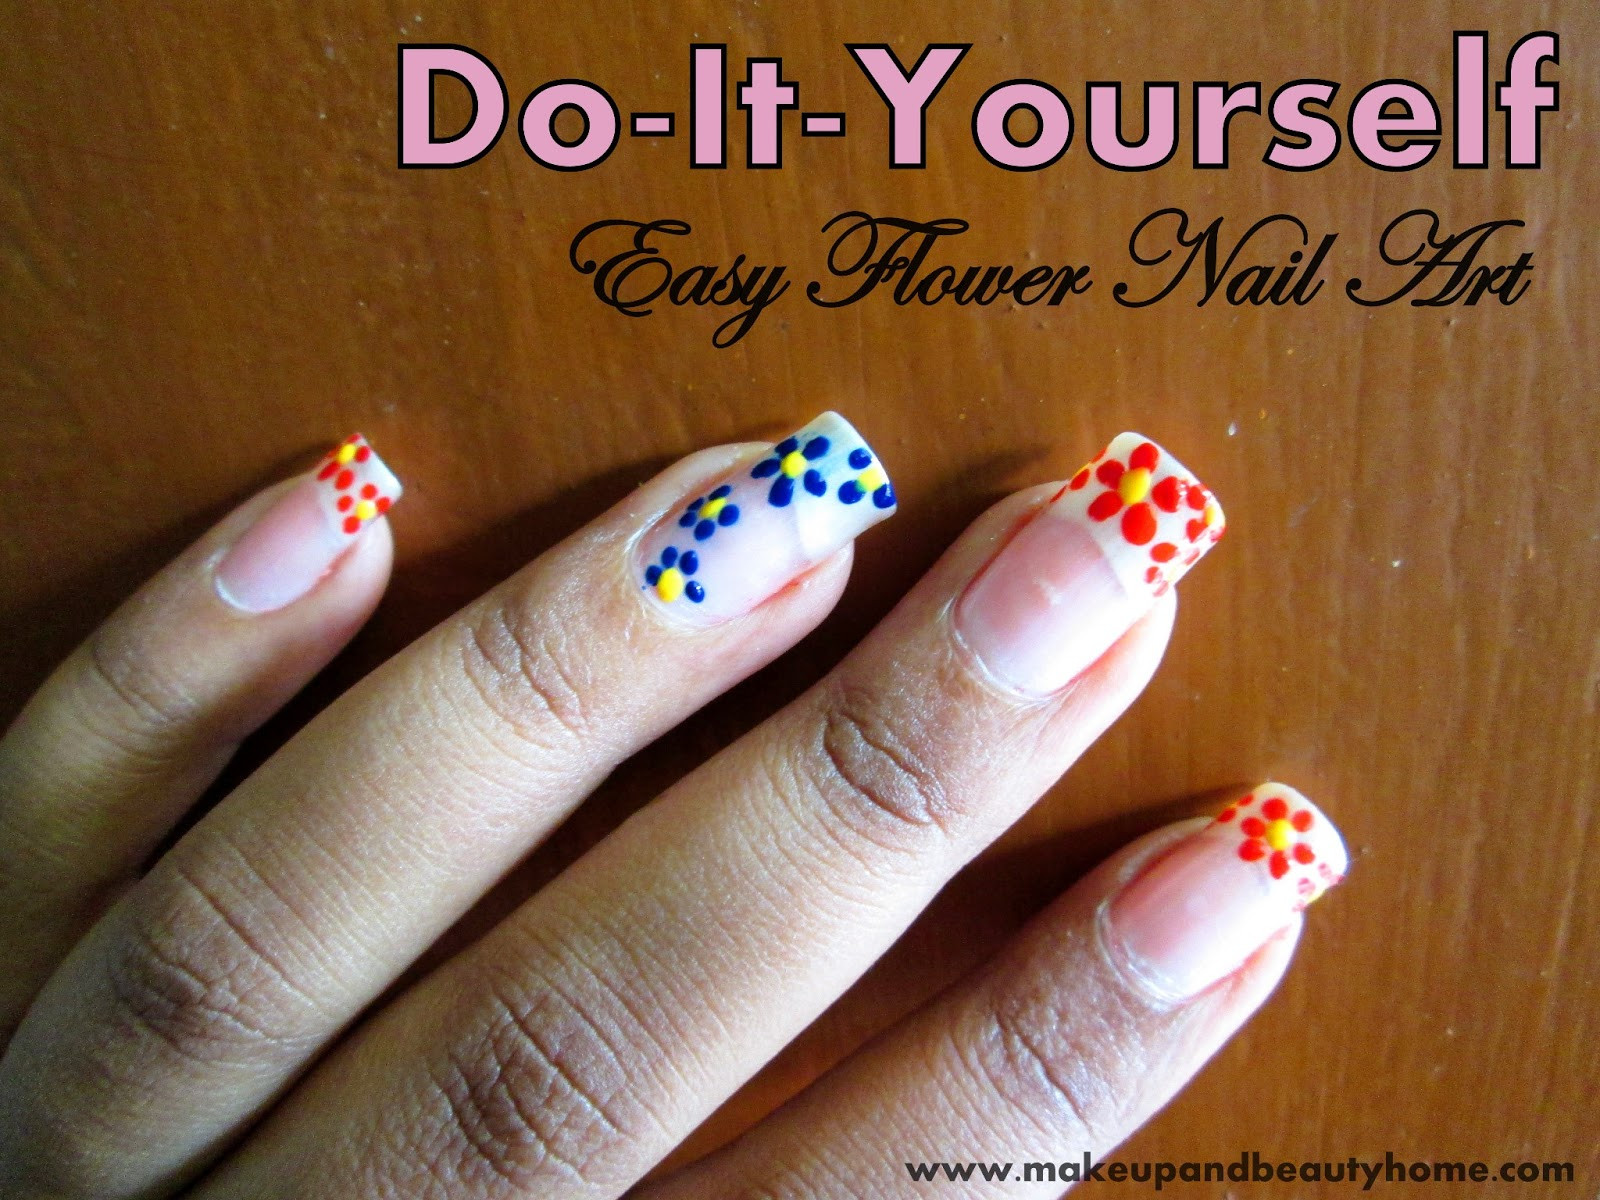 Do It Yourself Nail Designs
 Do It Yourself Easy Flower Nail Art 6 Easy Steps Blog